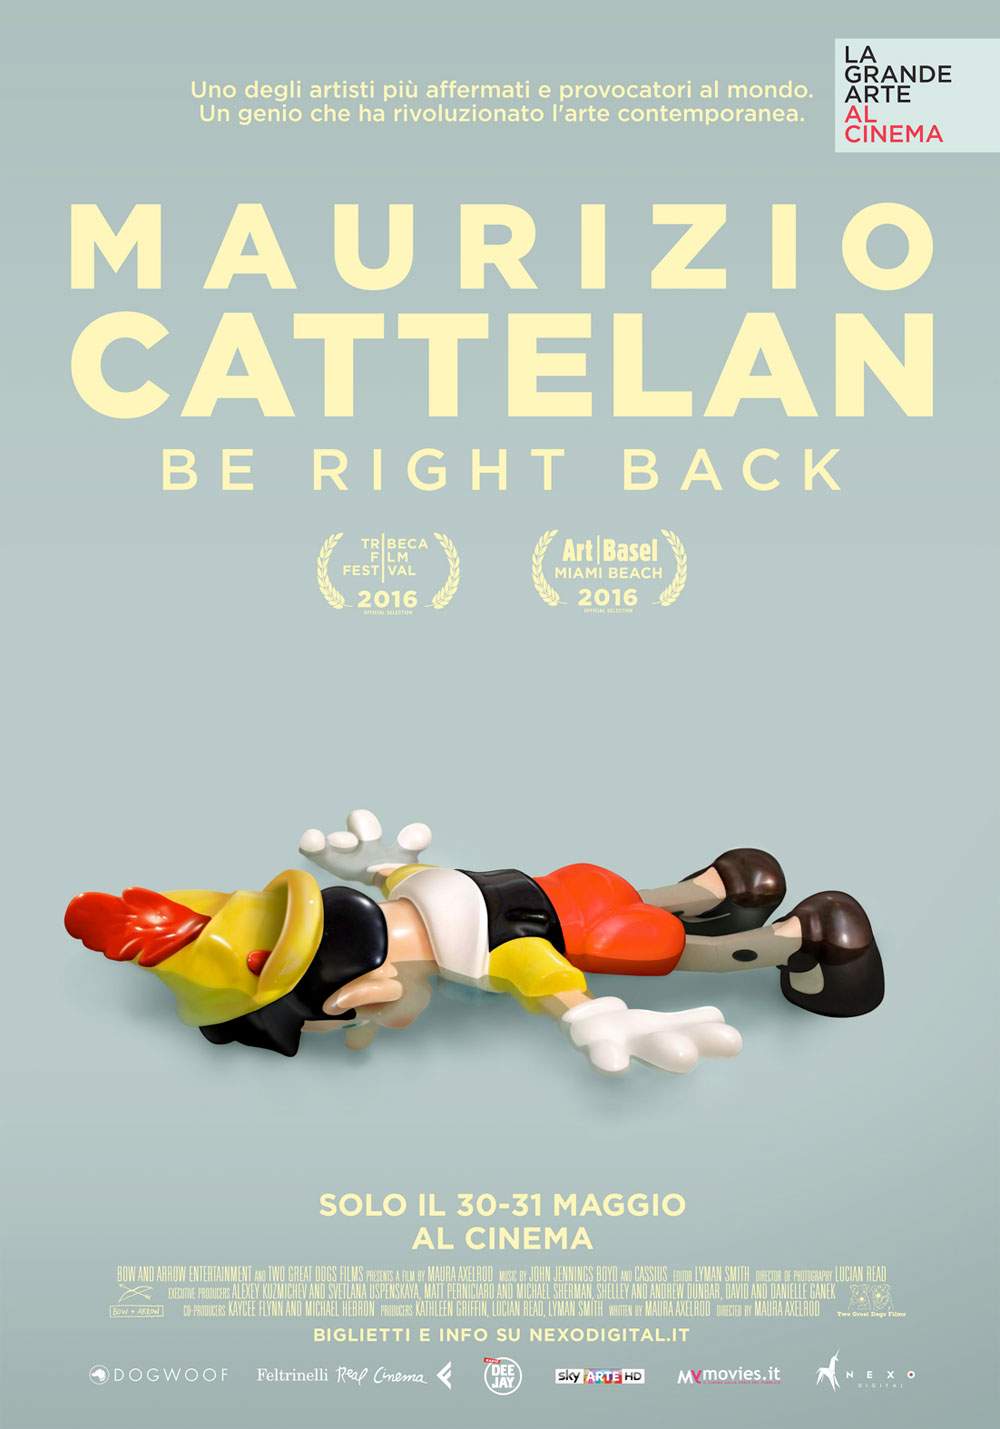 The docu-film dedicated to Cattelan on May 30 and 31 in theaters